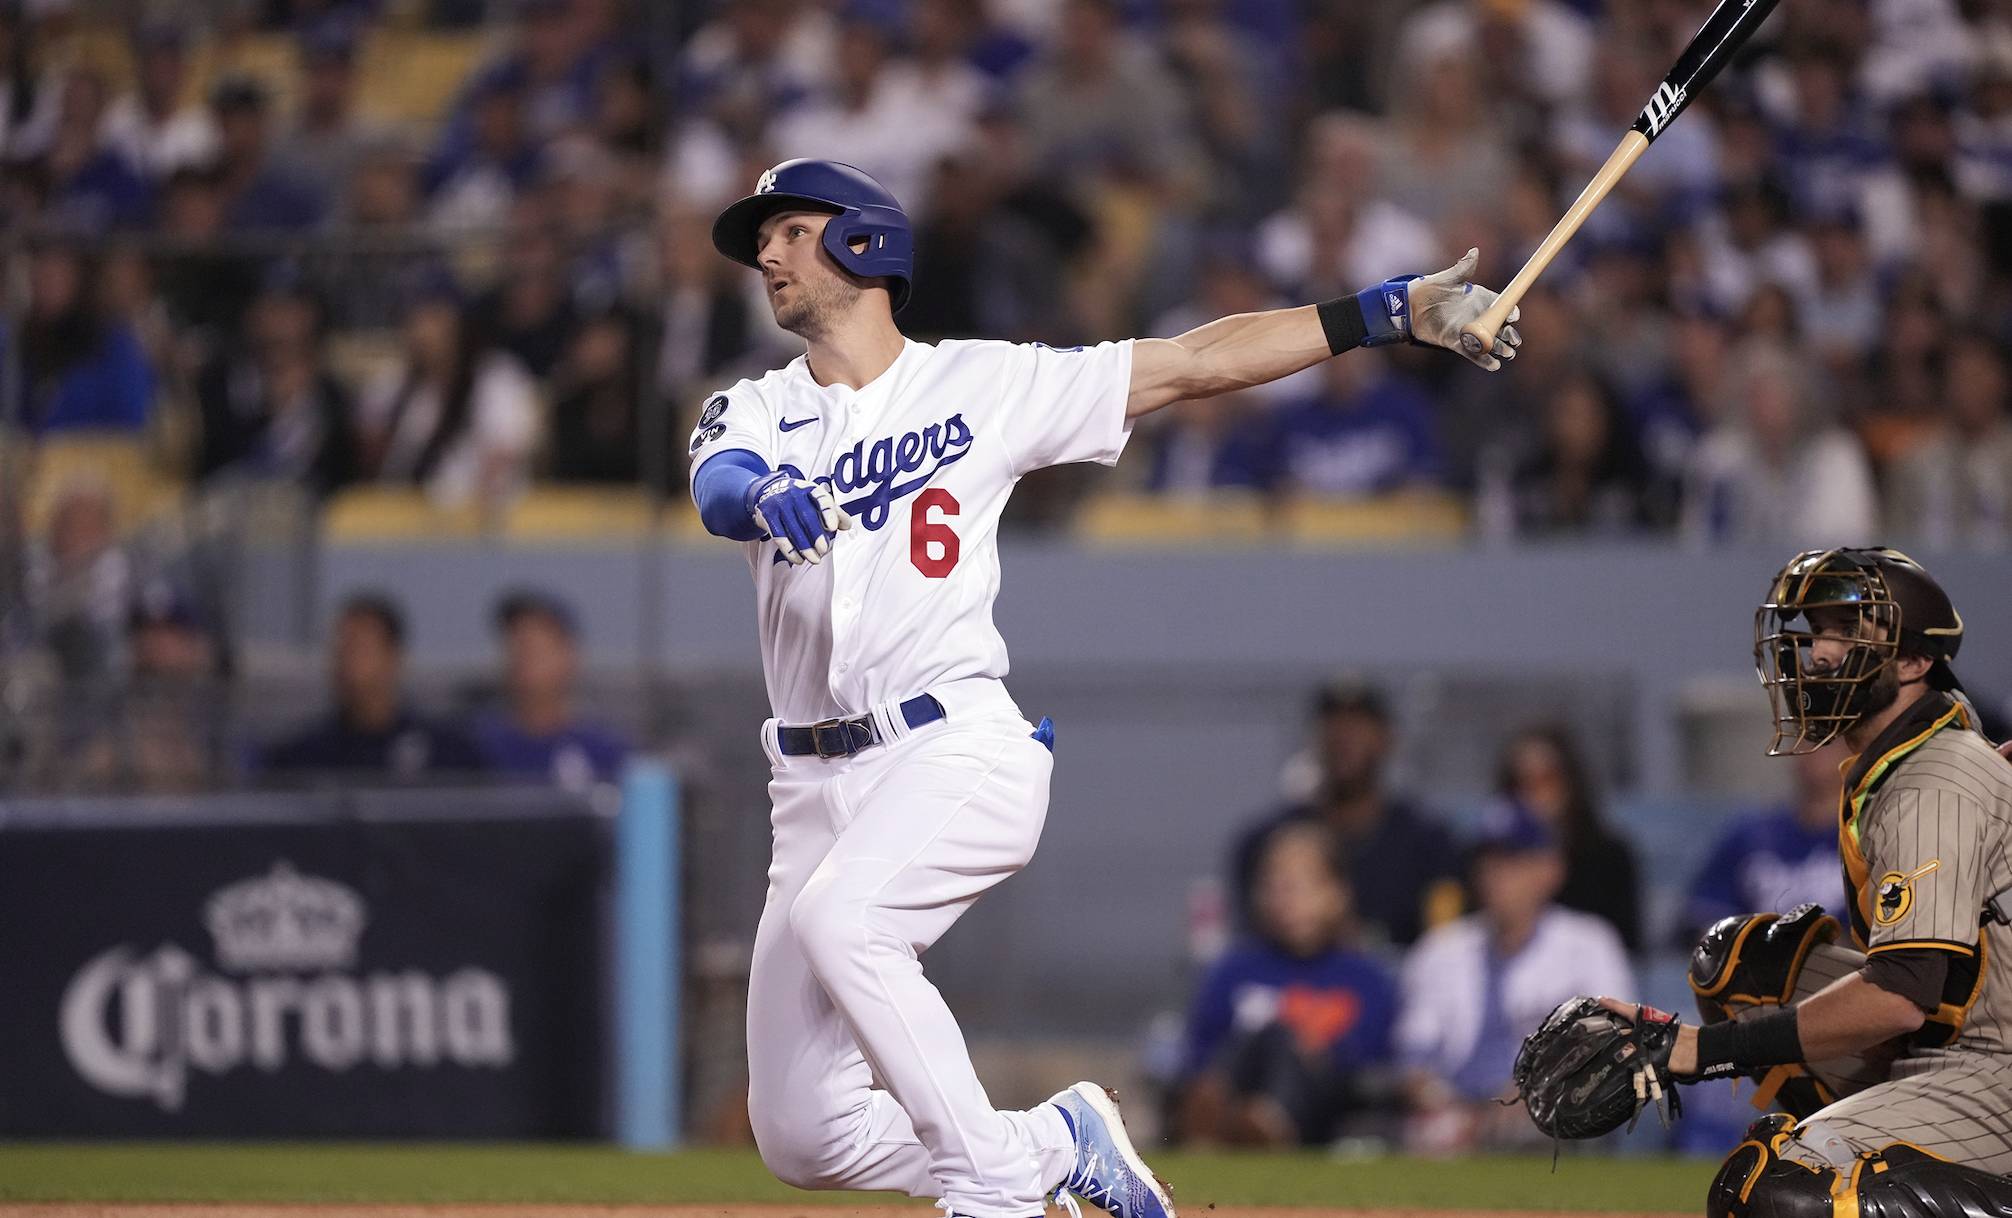 Trea Turner's Solo Blast Helps Propel Dodgers to Game 1 Victory in